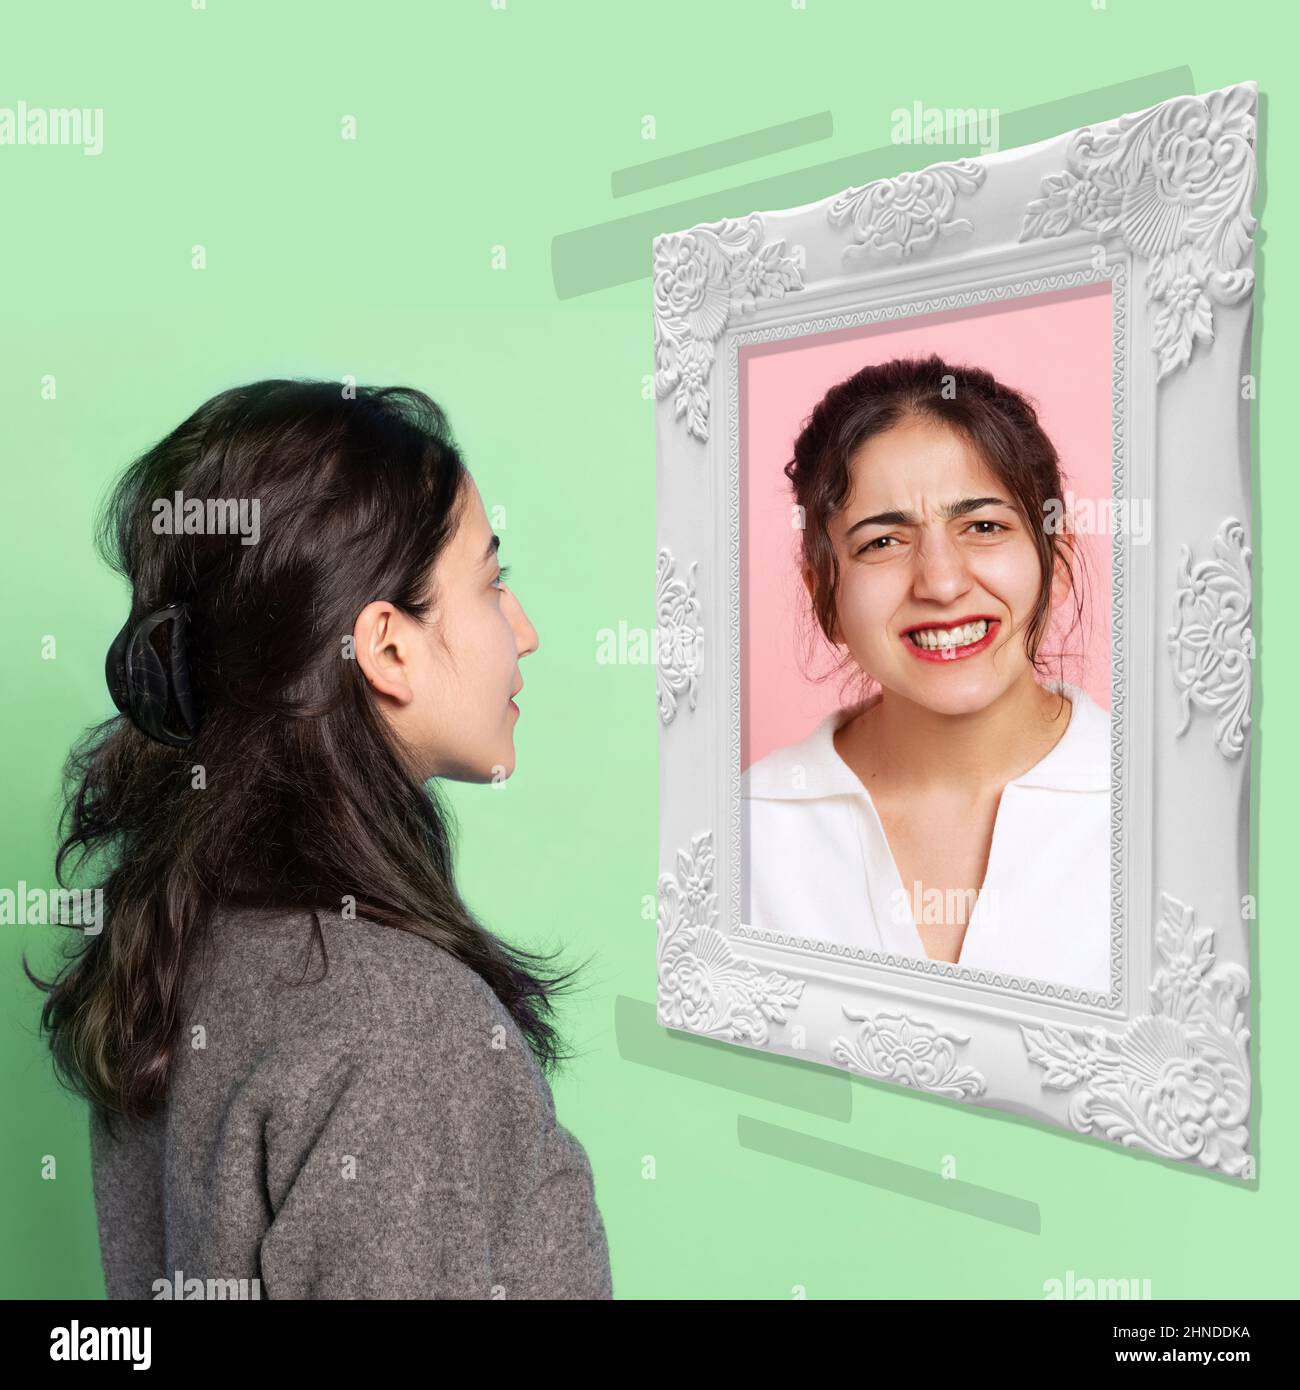 Young girl looking at mirror isolated on light background. Contemporary art collage. Concept of emotions, inner world, mental health Stock Photo